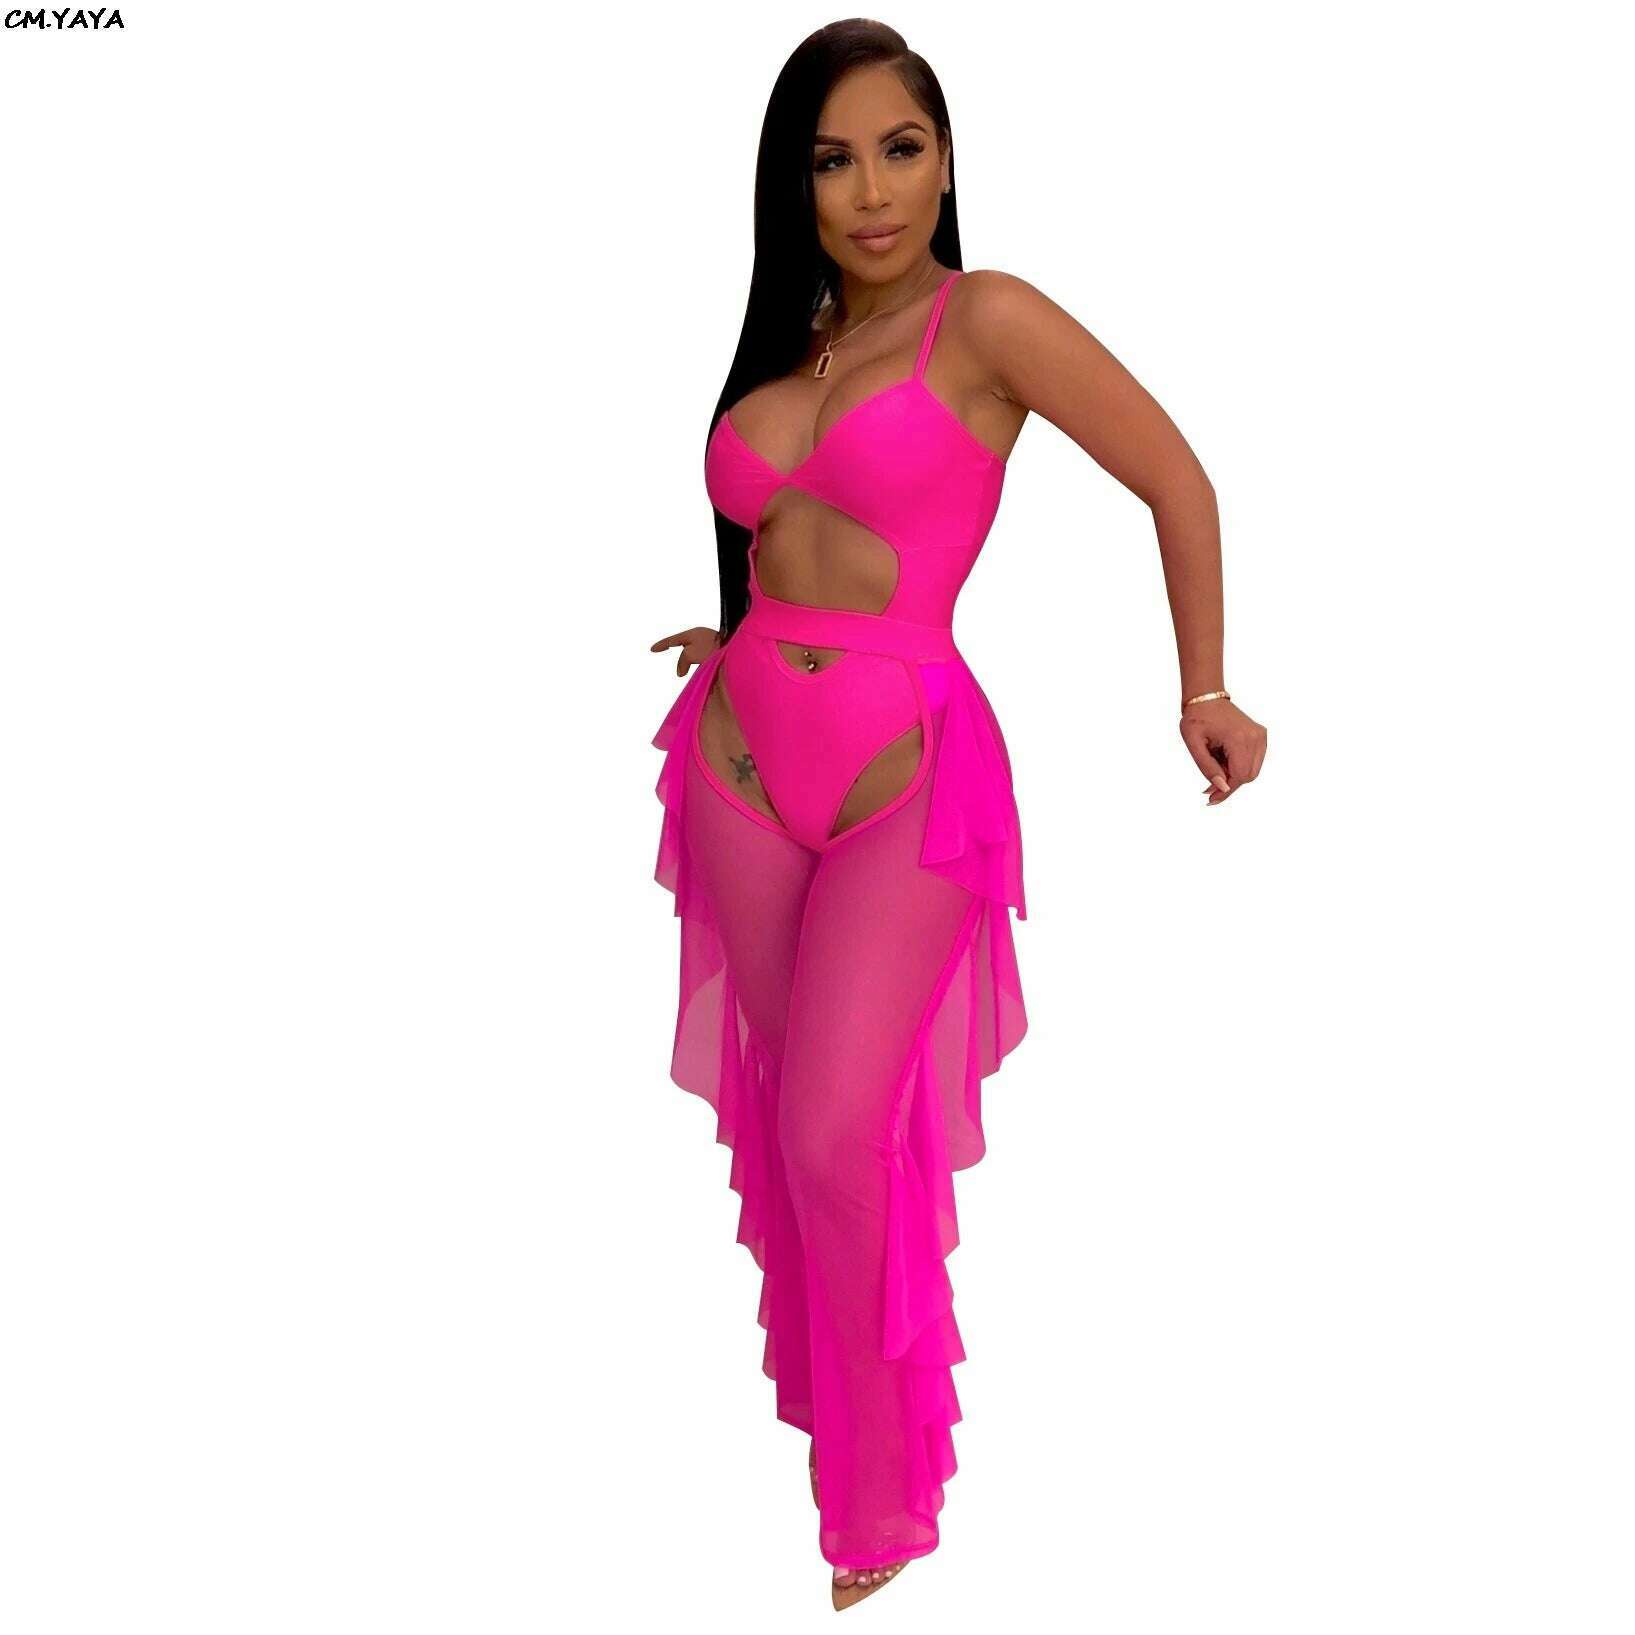 KIMLUD, 2022 Women Sexy Cut Out Bodysuit & Open Crotch Mesh Pants Suit Two Piece Set Beach Club Party Night Tracksuit 6color Outfit, Fuchsia / M, KIMLUD Women's Clothes